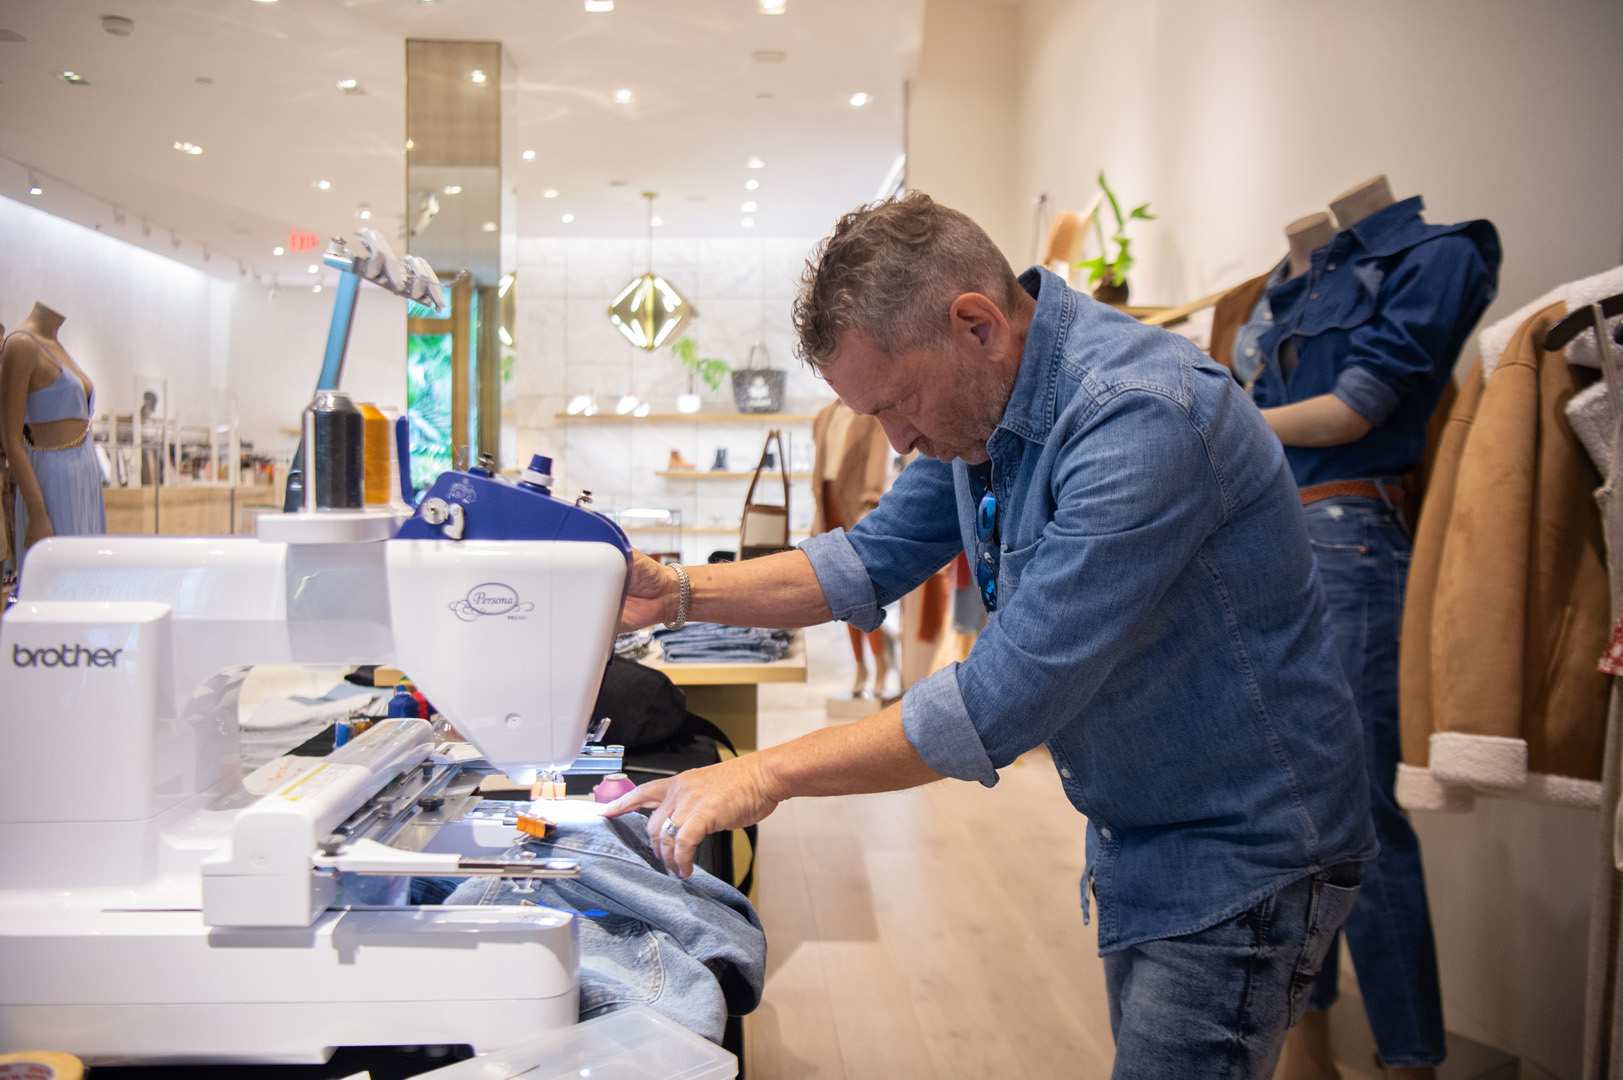 Craig Grossman embroidering jeans with a sewing machine